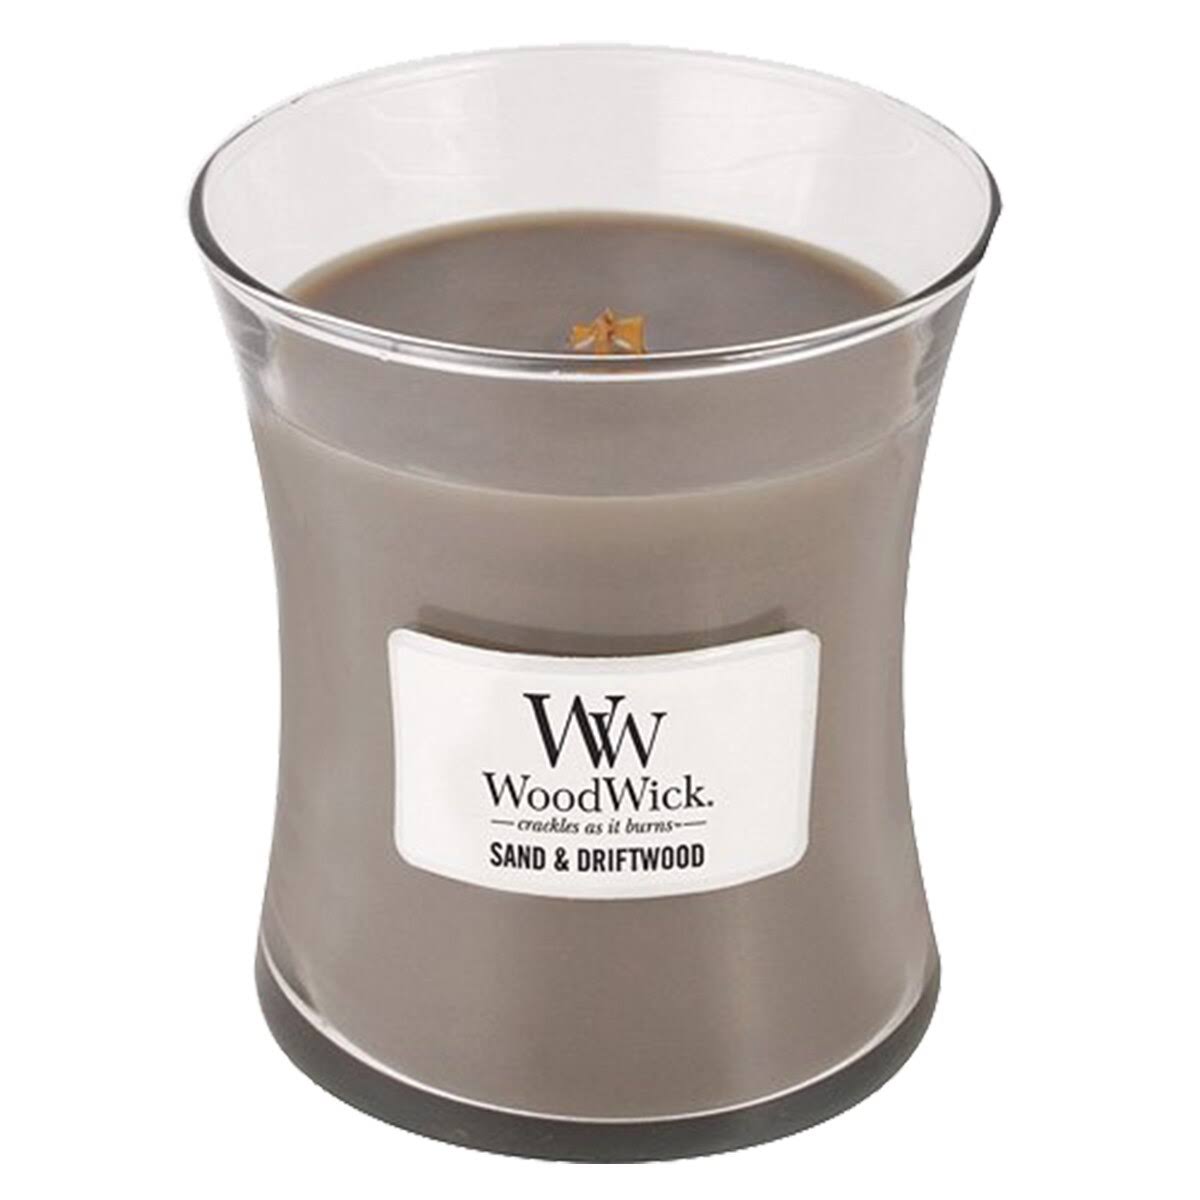 WoodWick Candle - Sand and Driftwood, 10oz